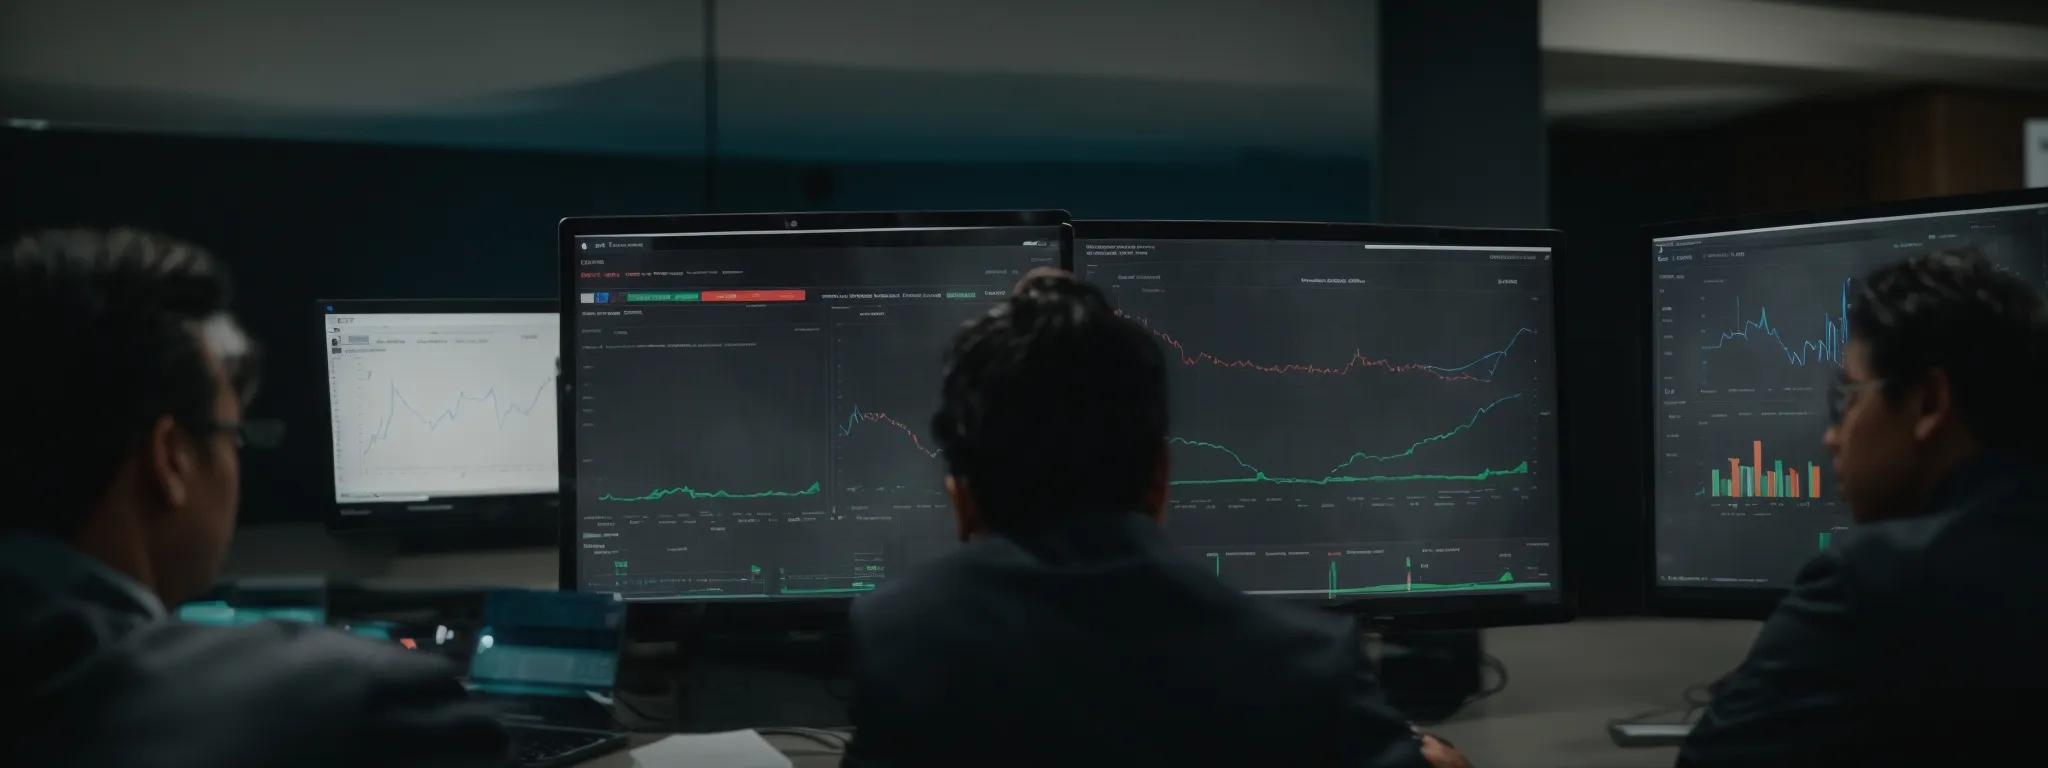 a marketing team reviews analytics dashboards on a computer screen, assessing the performance of their seo strategy.